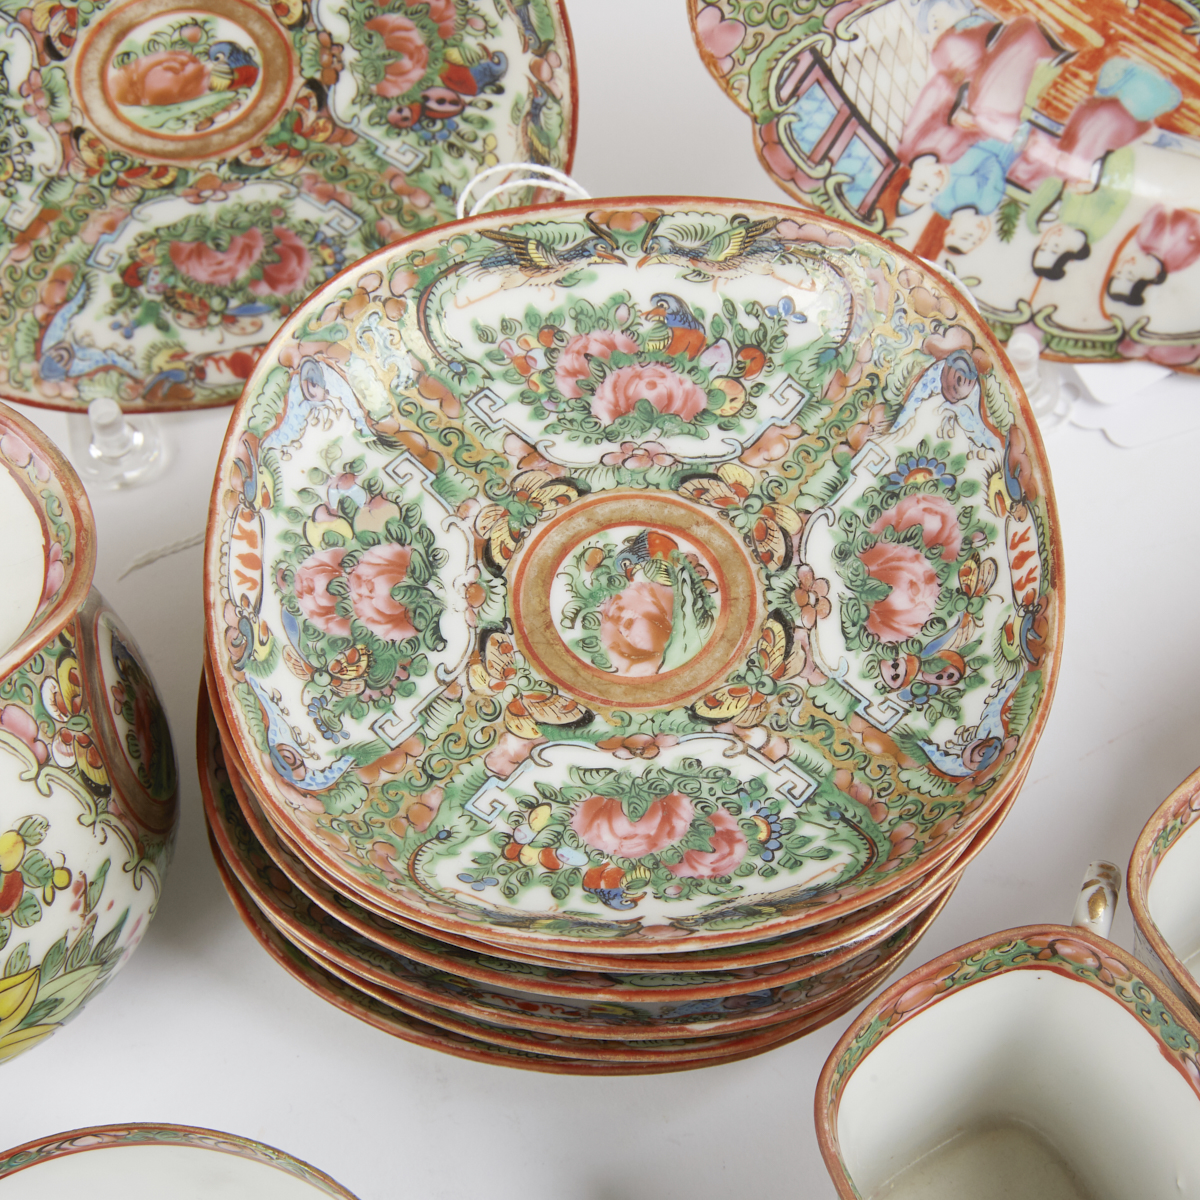 Lrg Grp Chinese Porcelain Rose Medallion & Cabbage Ware - Image 5 of 5